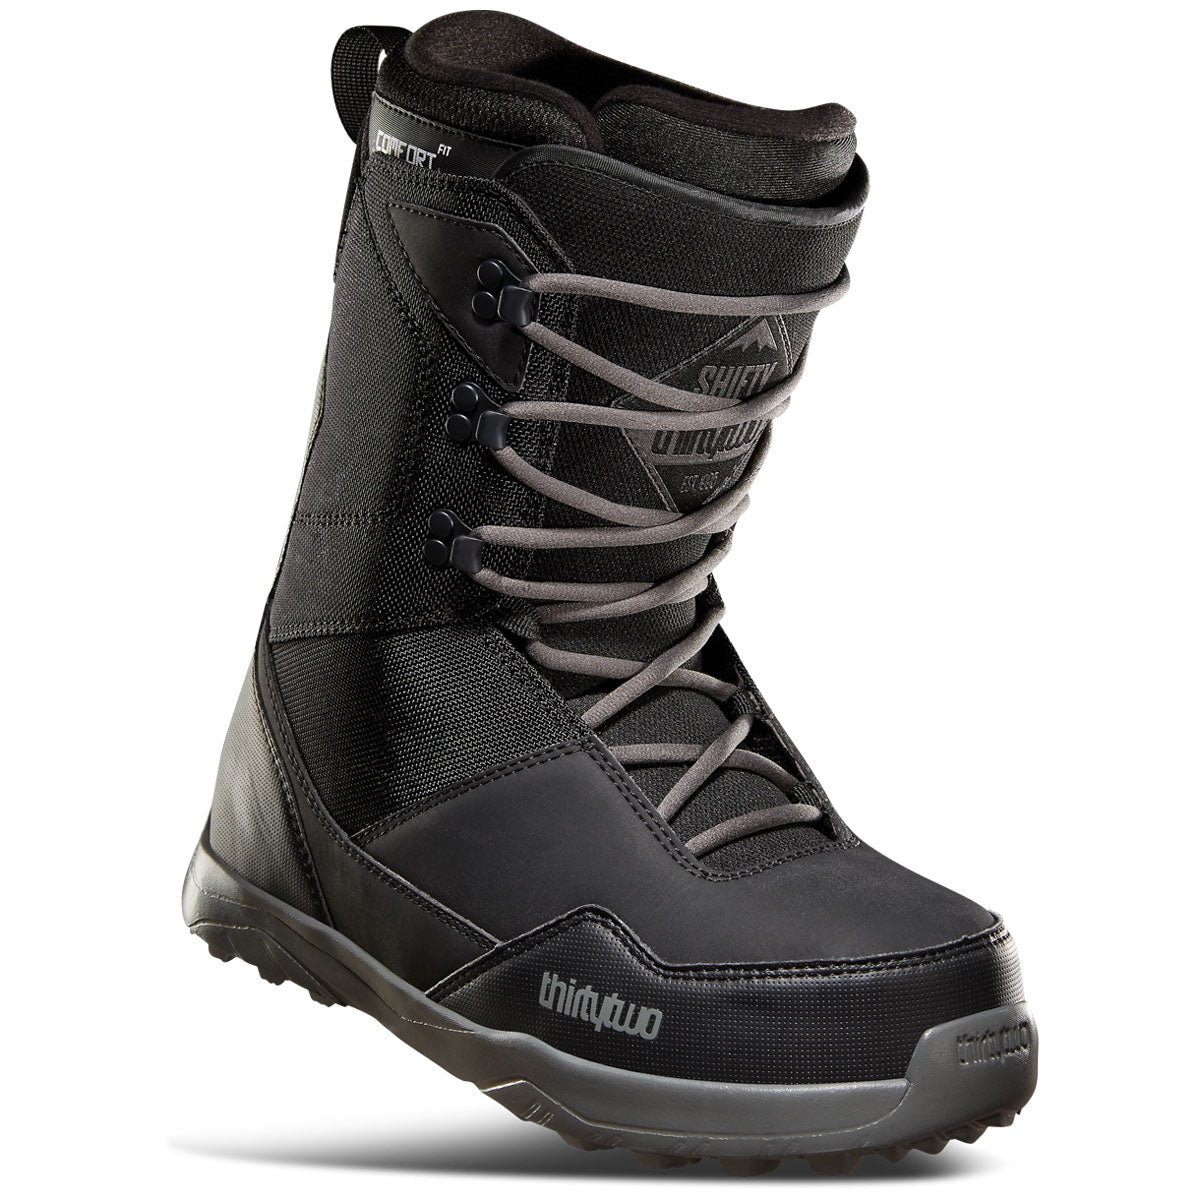 Thirty Two Shifty Snowboard Boots - Black image 1